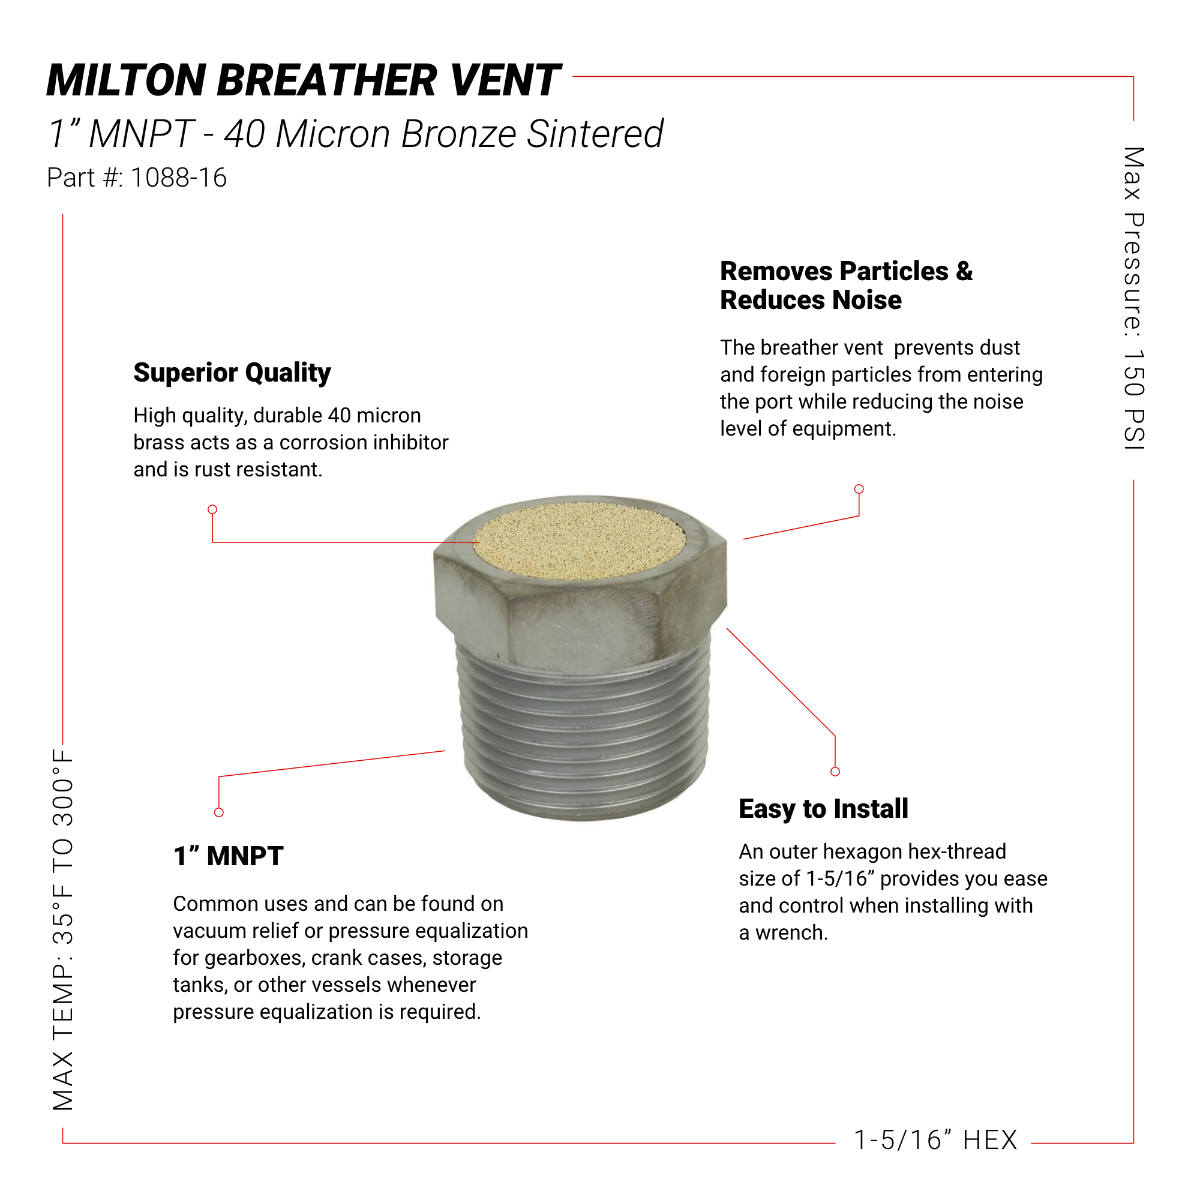 High Heat Resistance, mictron™, Technical Information